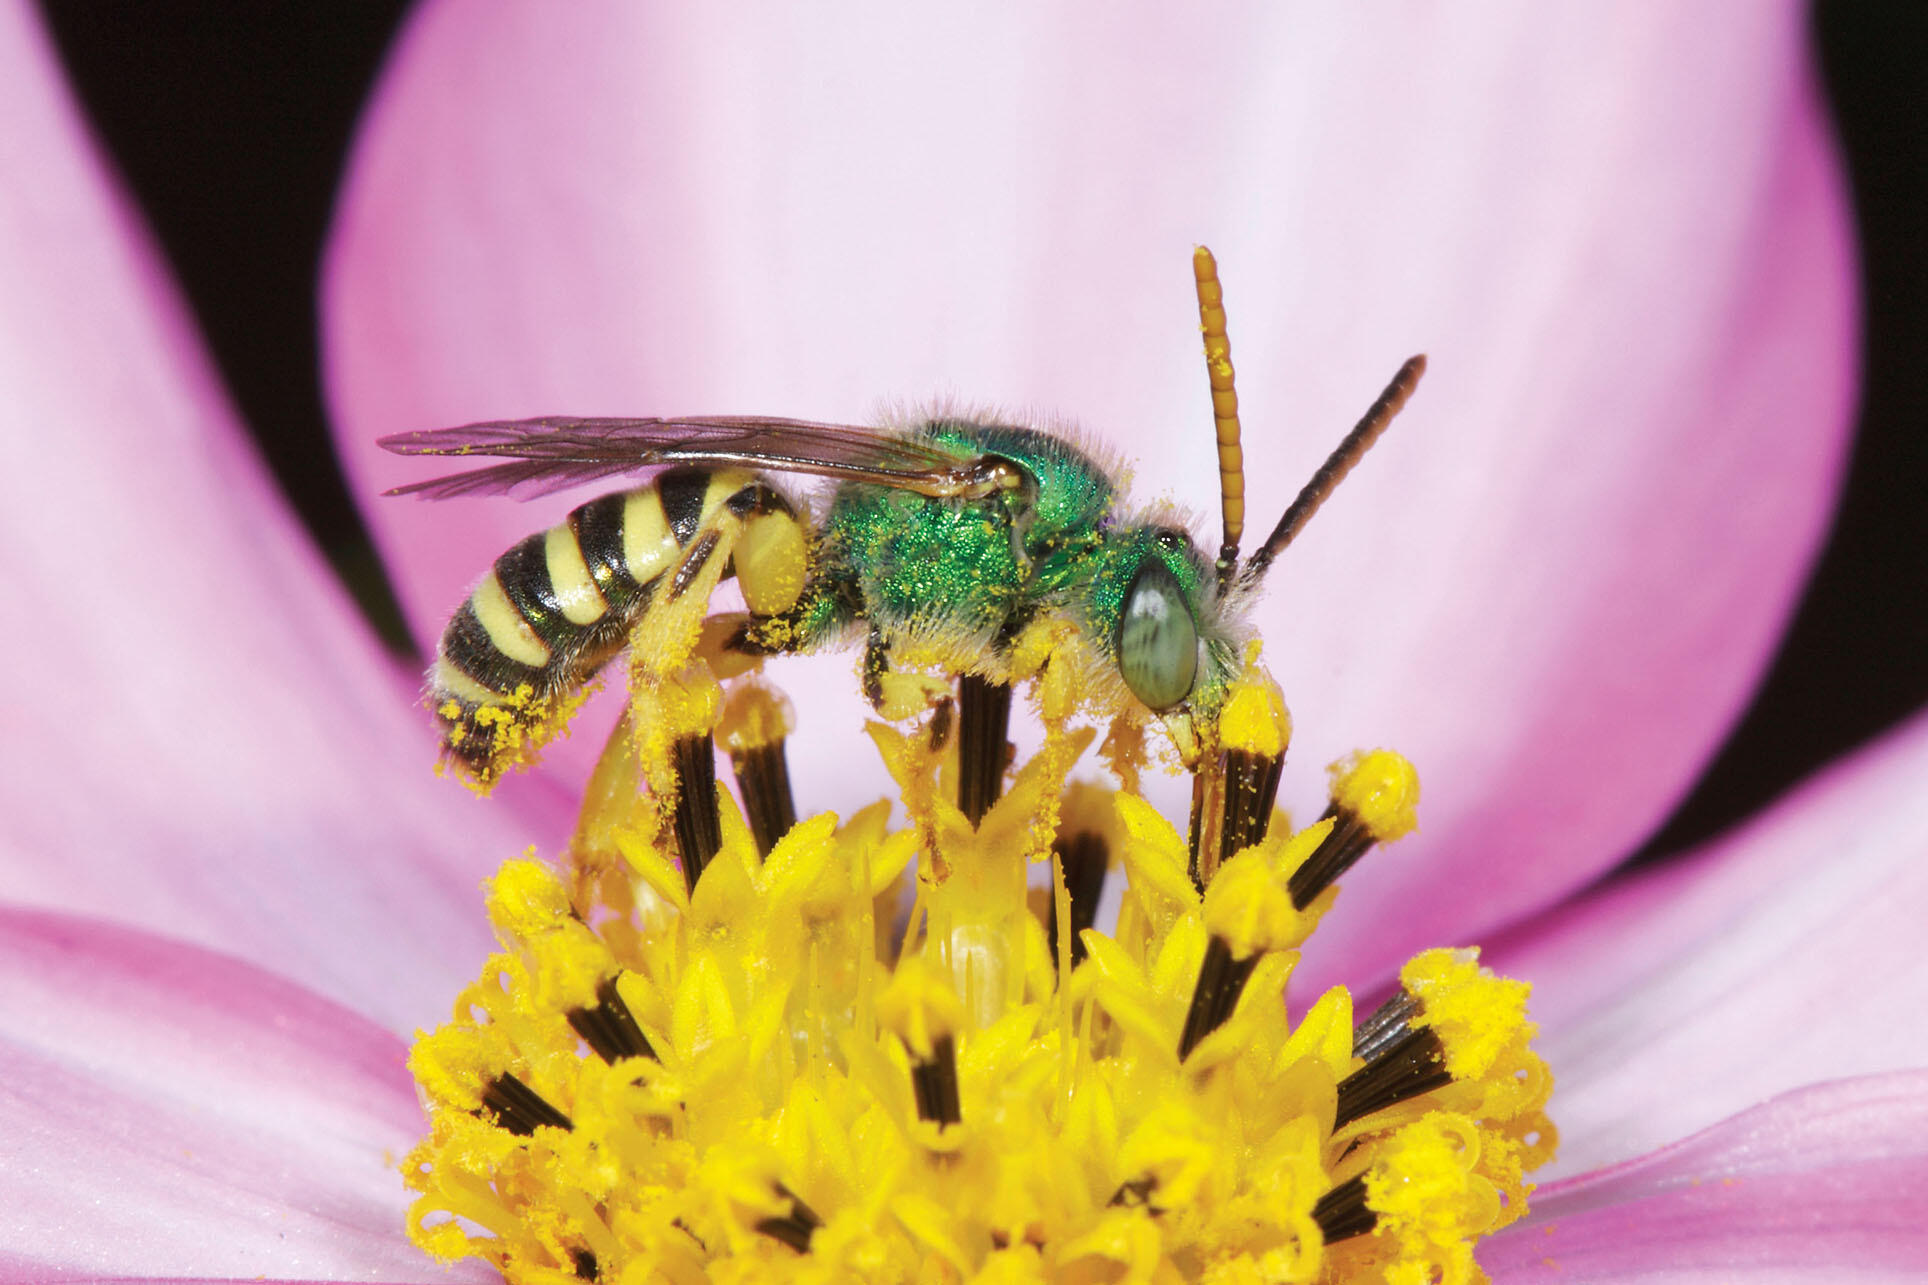 An iridescent green male ultra green sweat bee covered in yellow pollen. (Photo by Rollin Coville.)